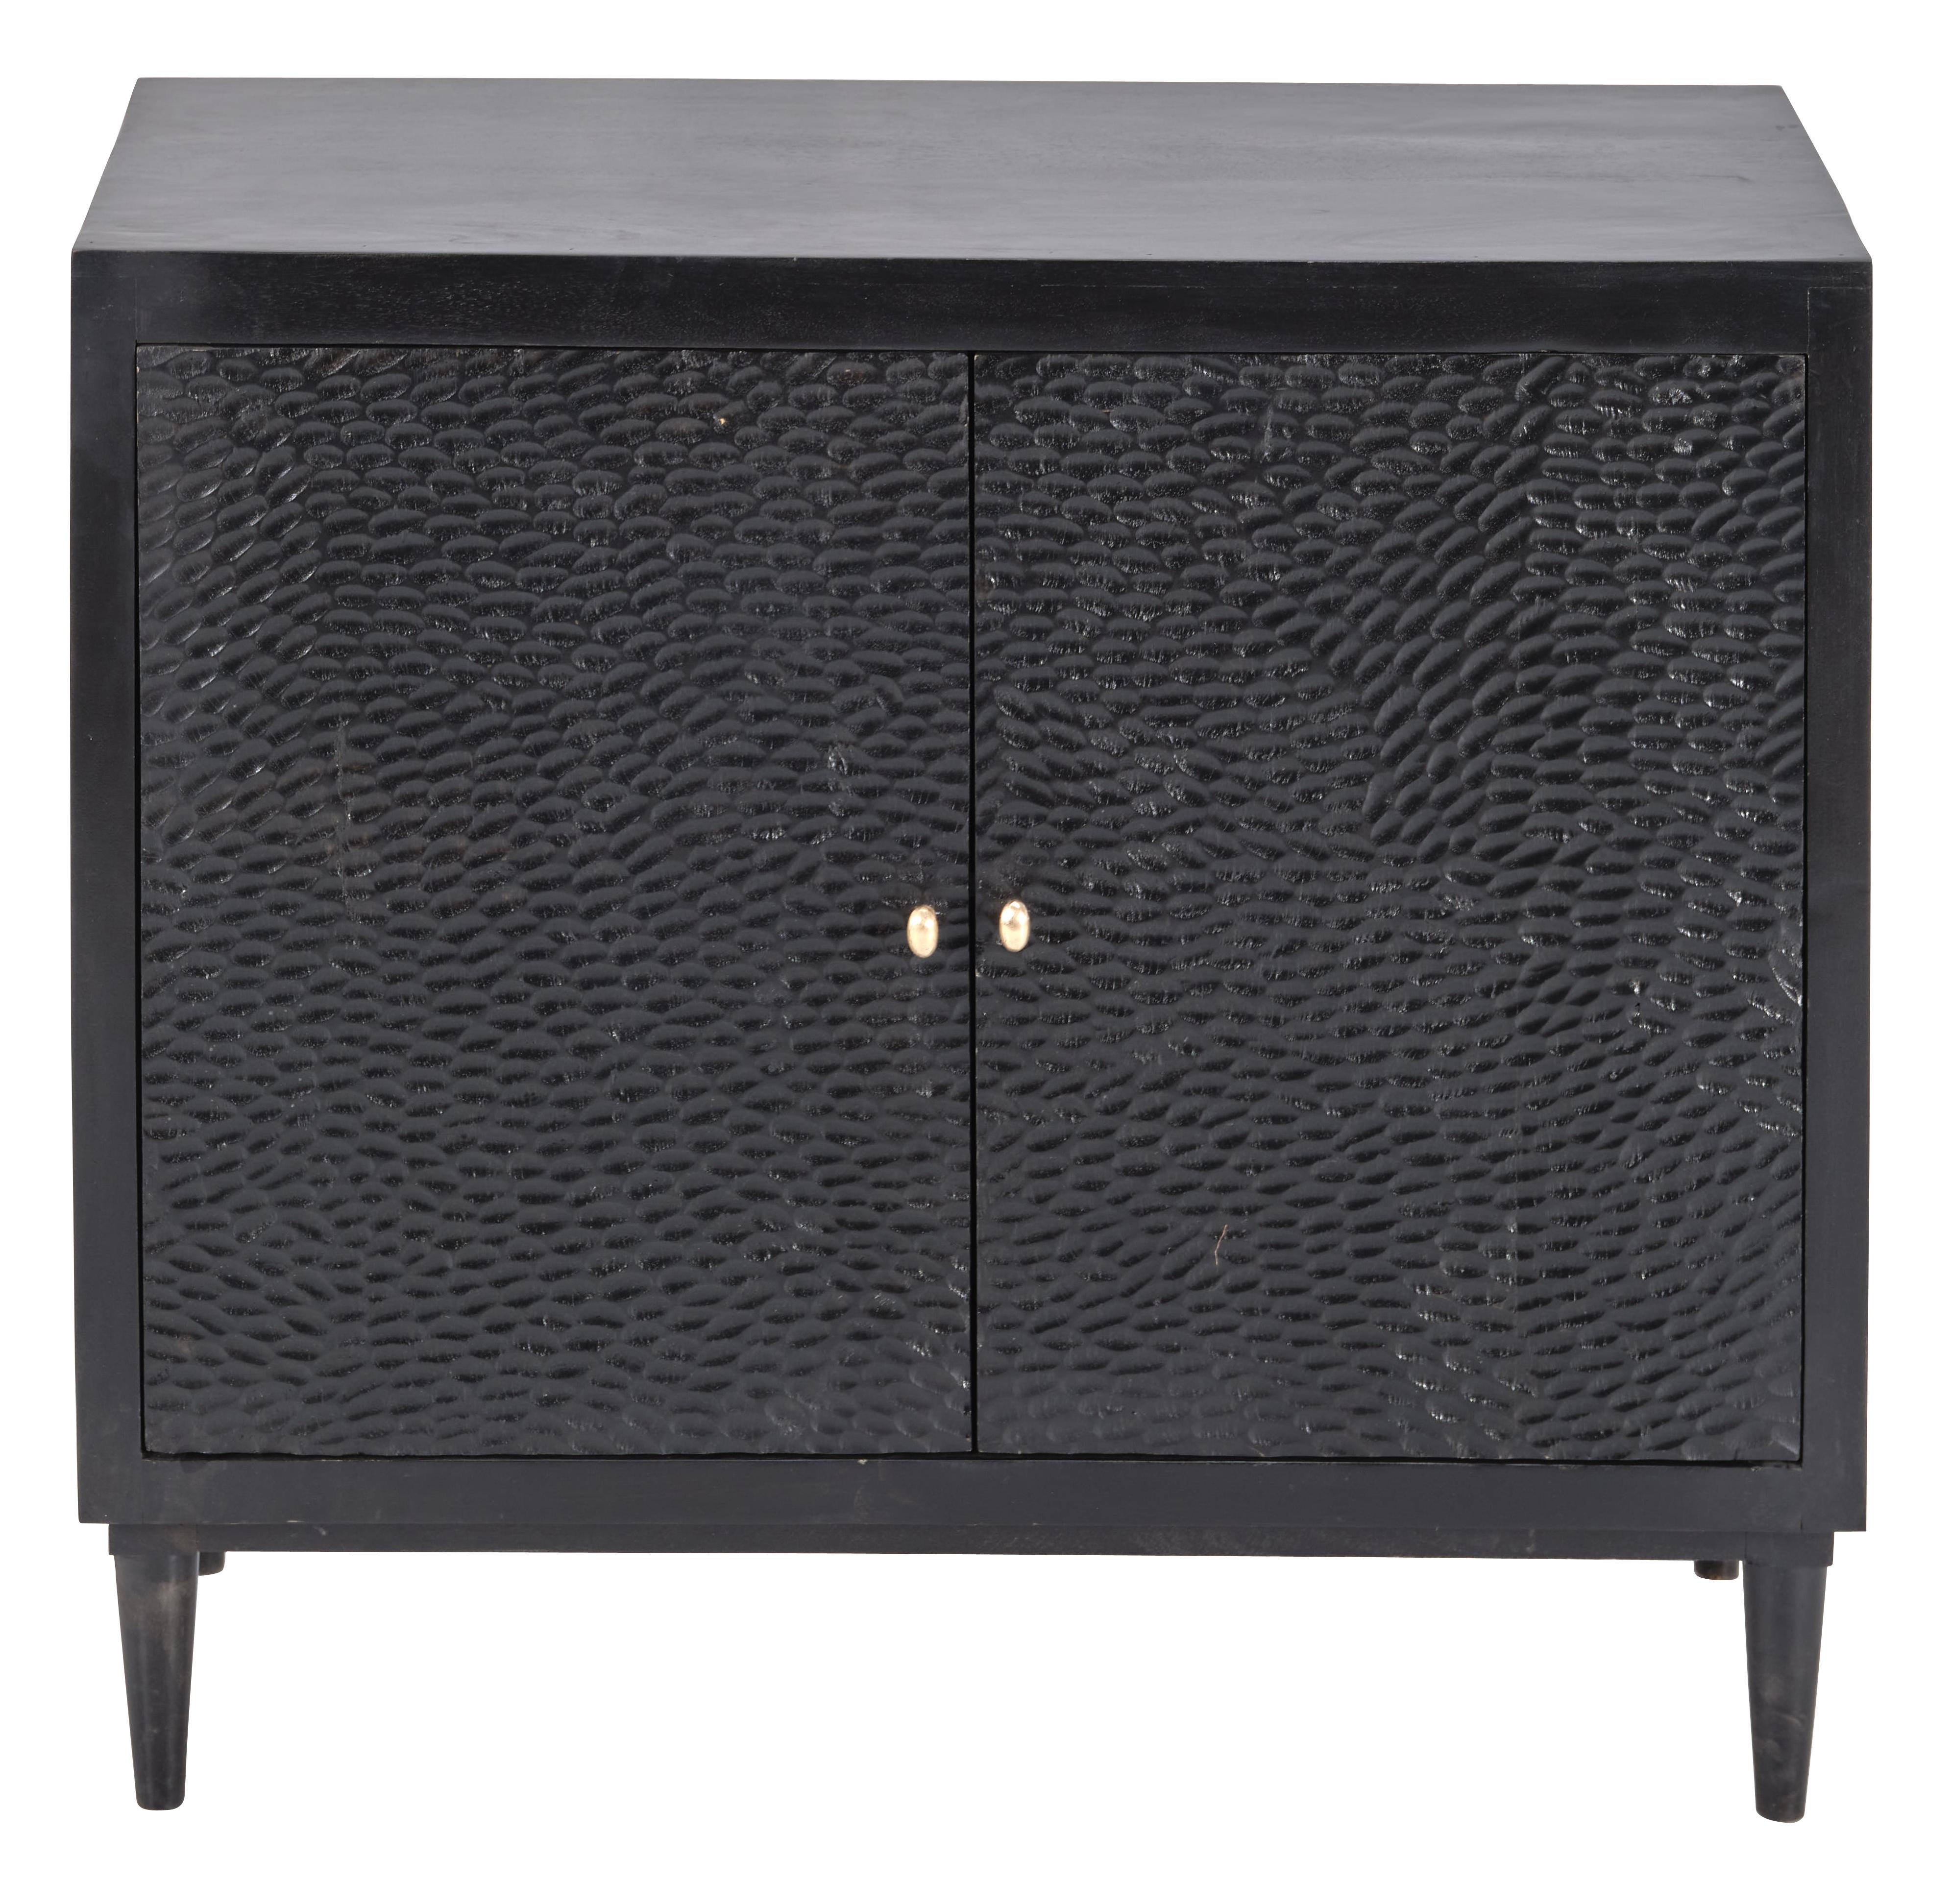 Contemporary Cabinet DYS-24206 Narissa DYS-24206 in Charcoal 